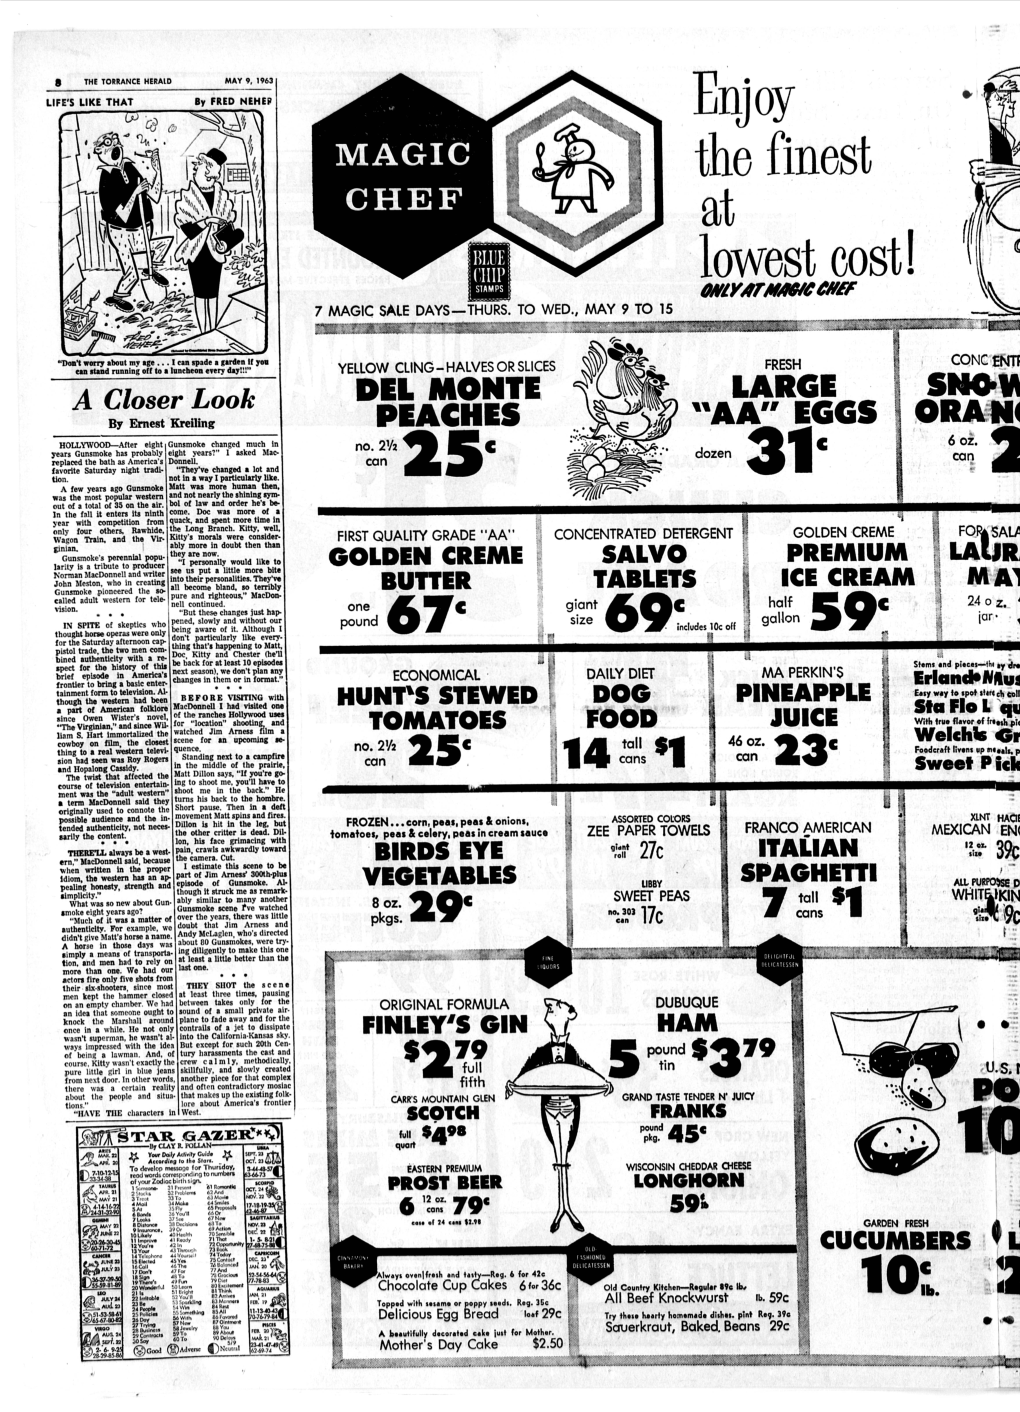 TORRANCE HERALD MAY 9, 1963 | LIFE's LIKE THAT by FRED NEHEP Enjoy the Finest at , I CHIP I Lowest Cost! J STAMPS | 7 MAGIC SALE DAYS THURS